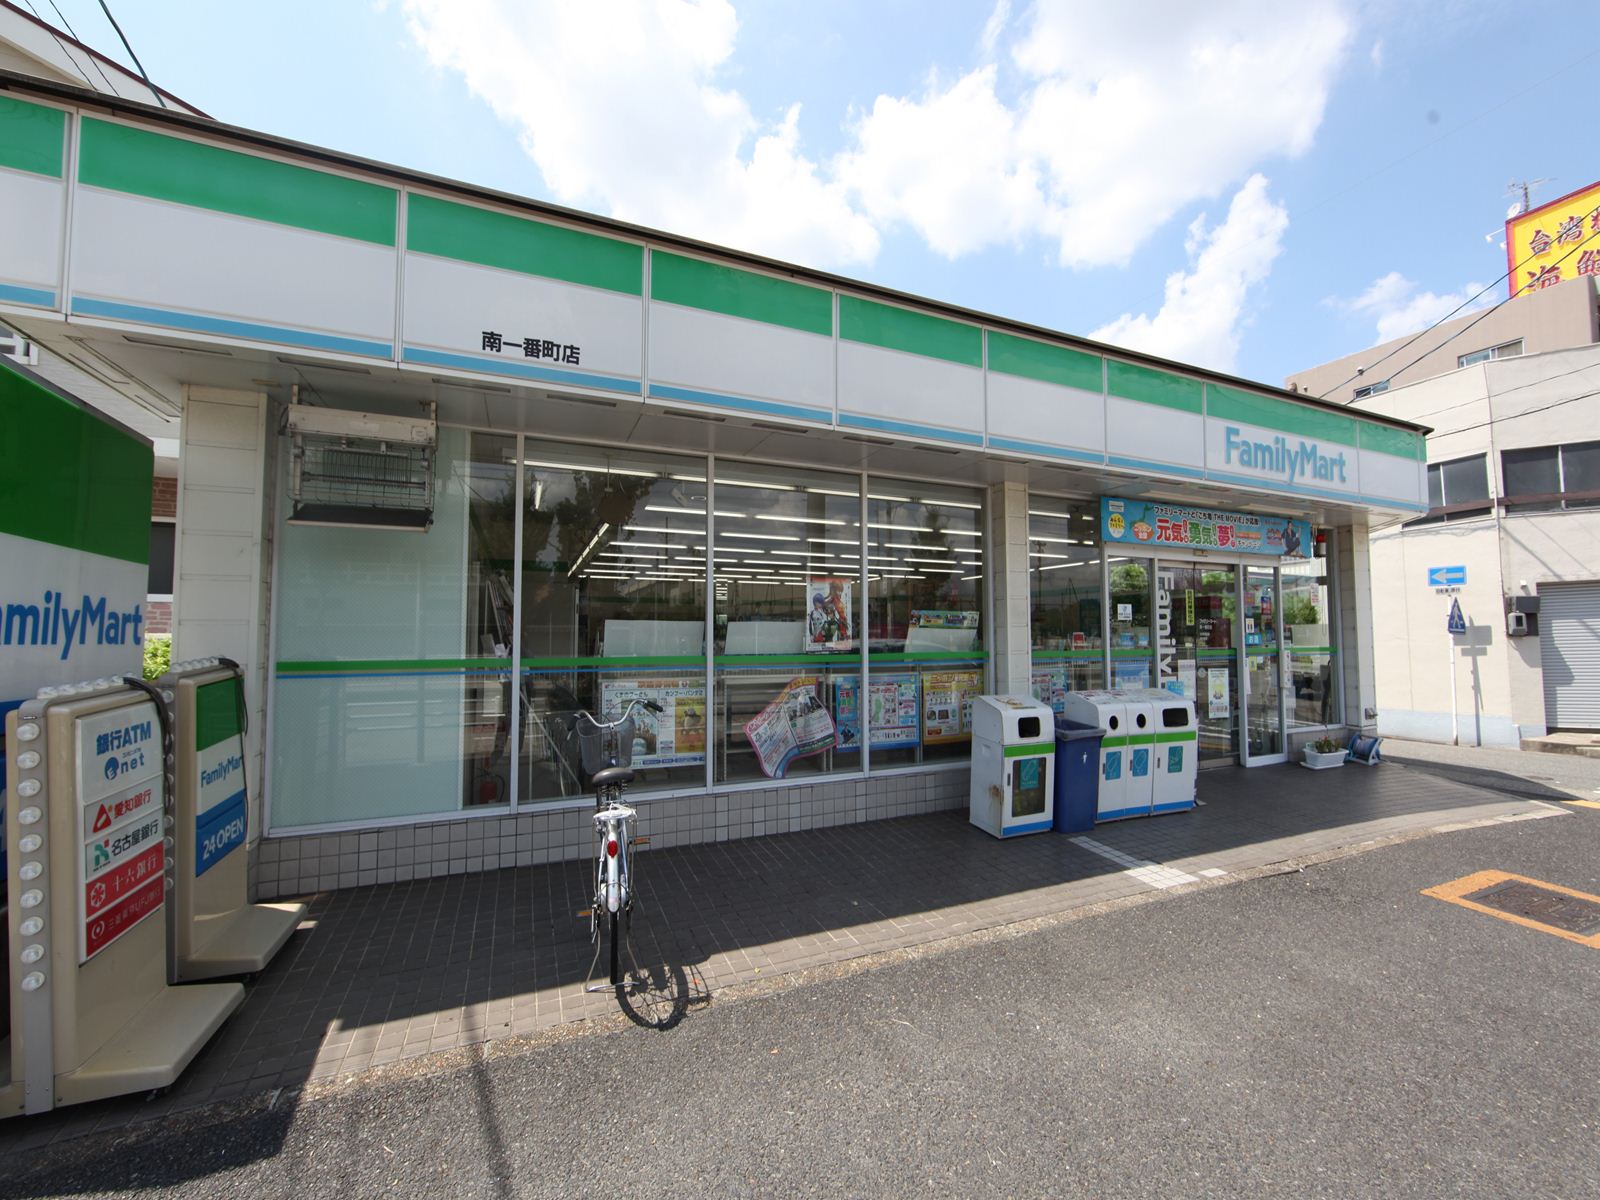 Convenience store. 441m to FamilyMart Minamiichiban the town store (convenience store)